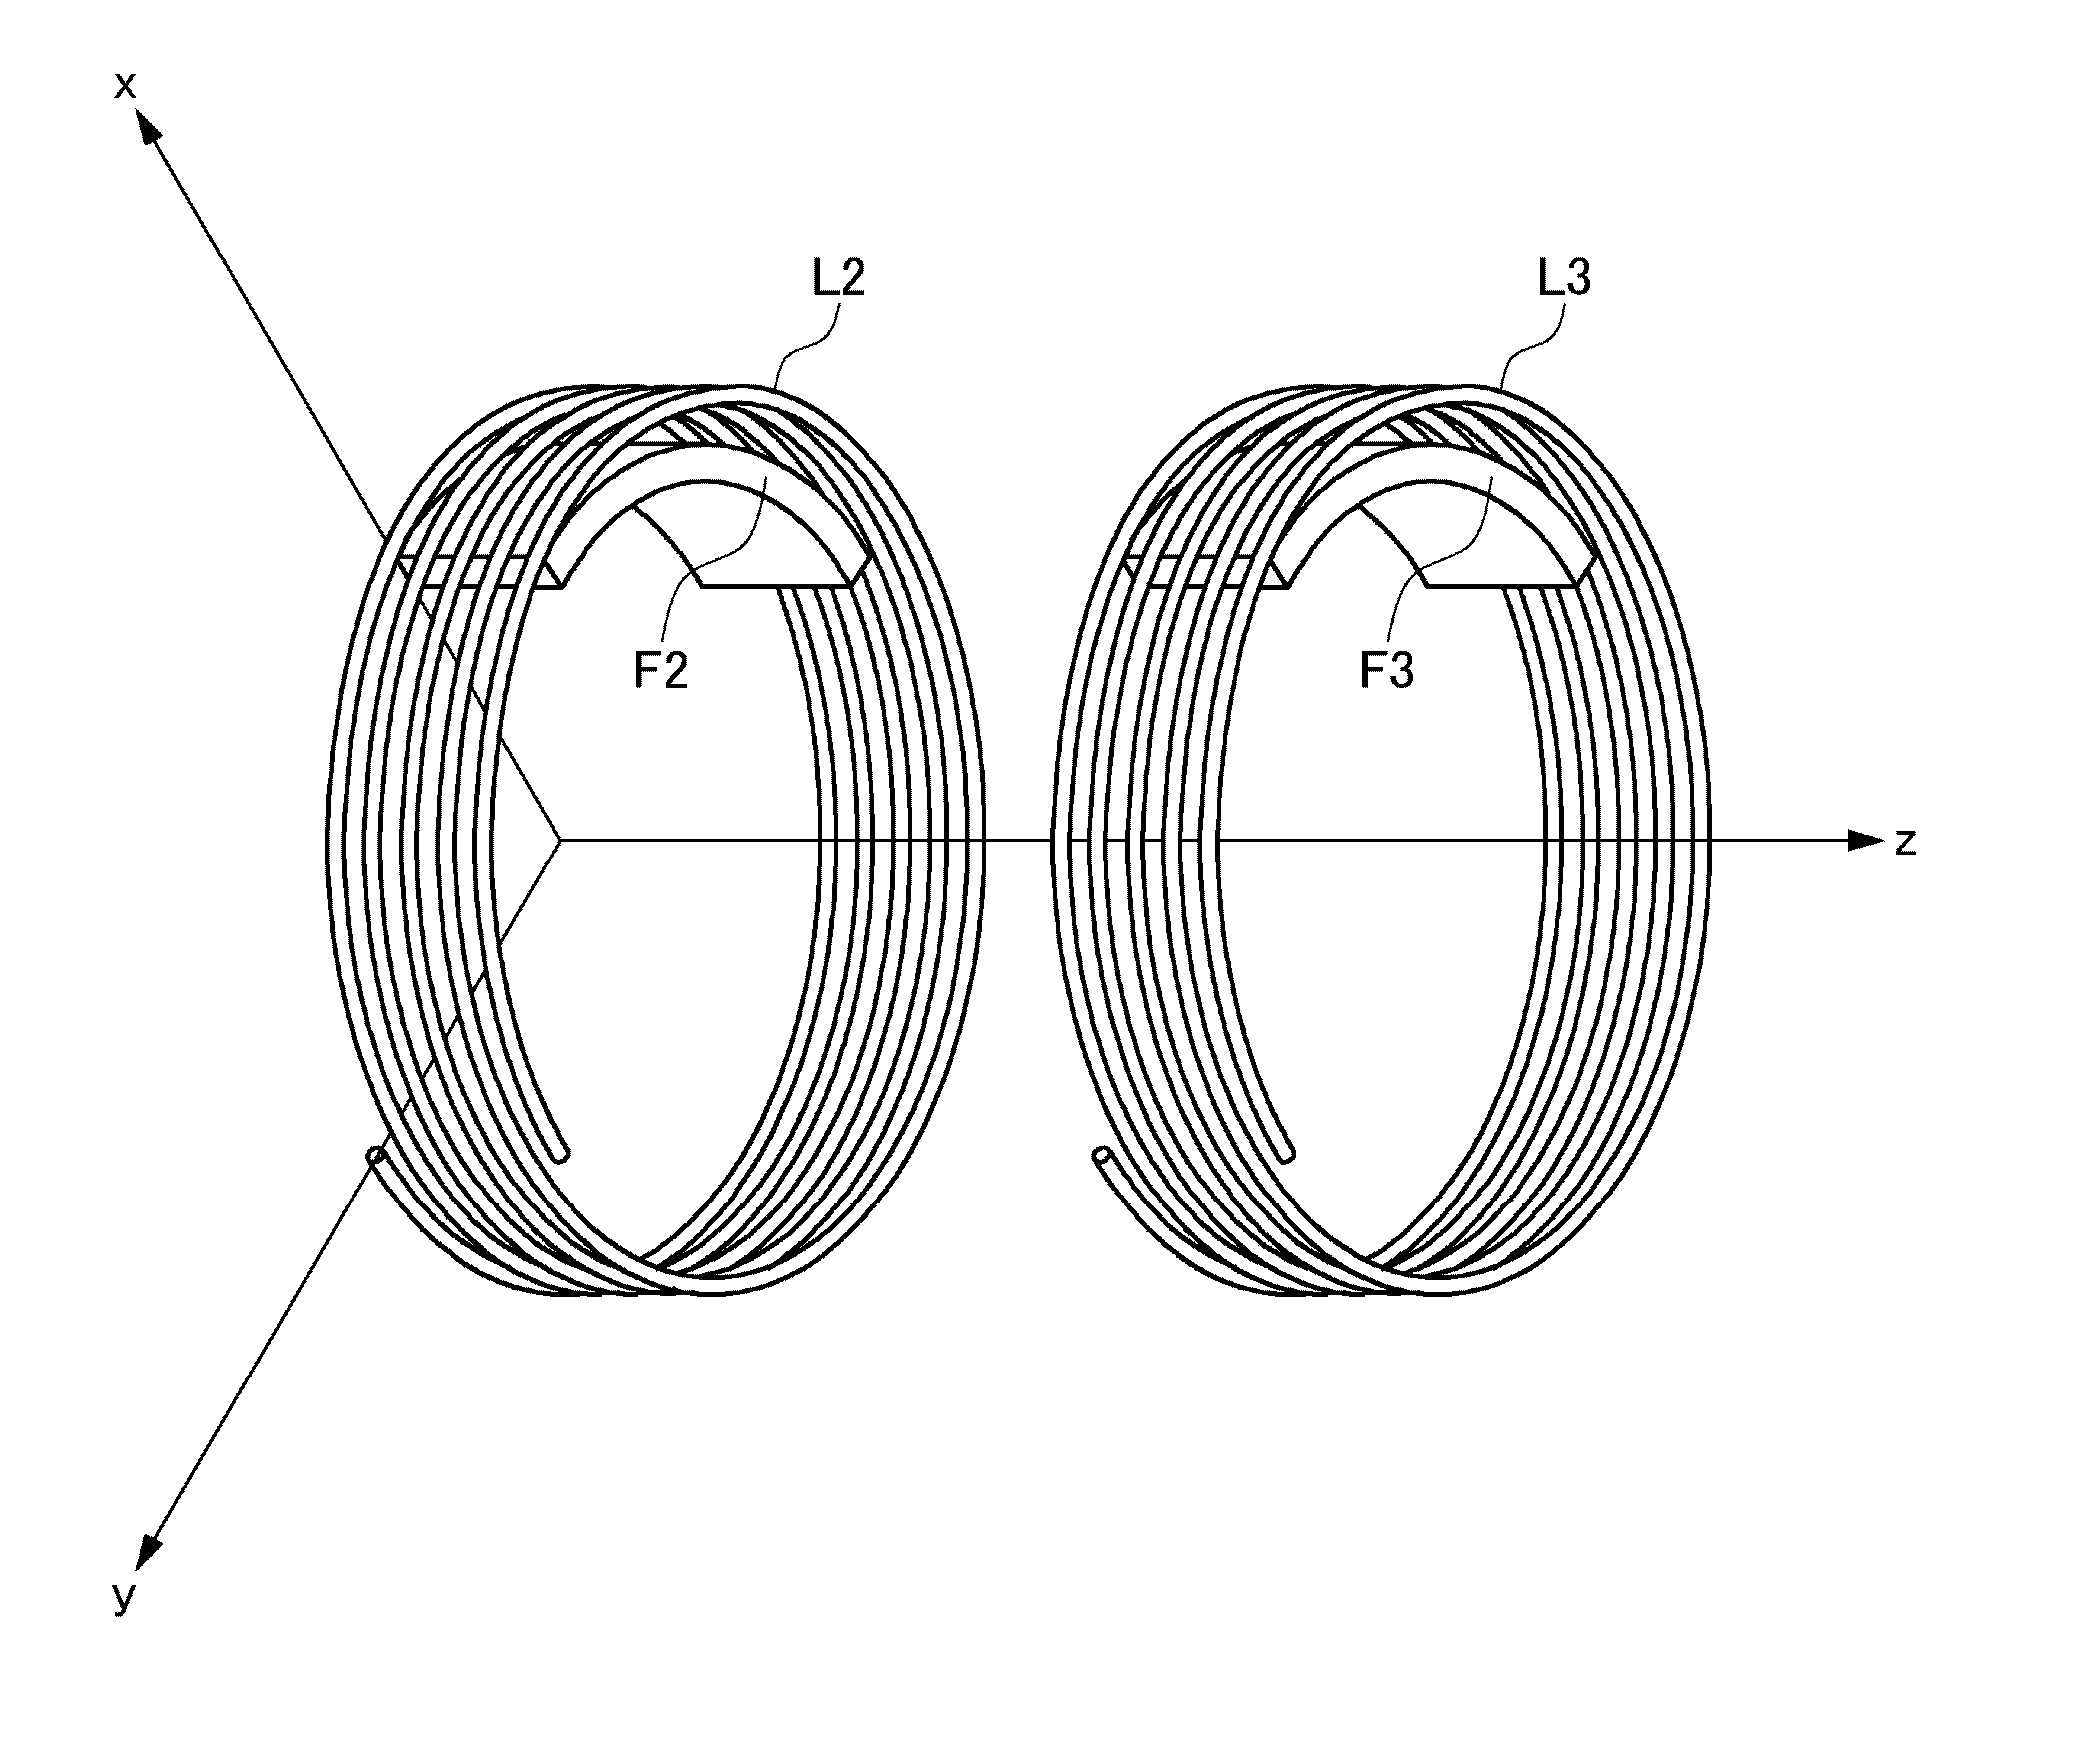 Wireless power feeder, wireless power receiver, and wireless power transmission system, and coil